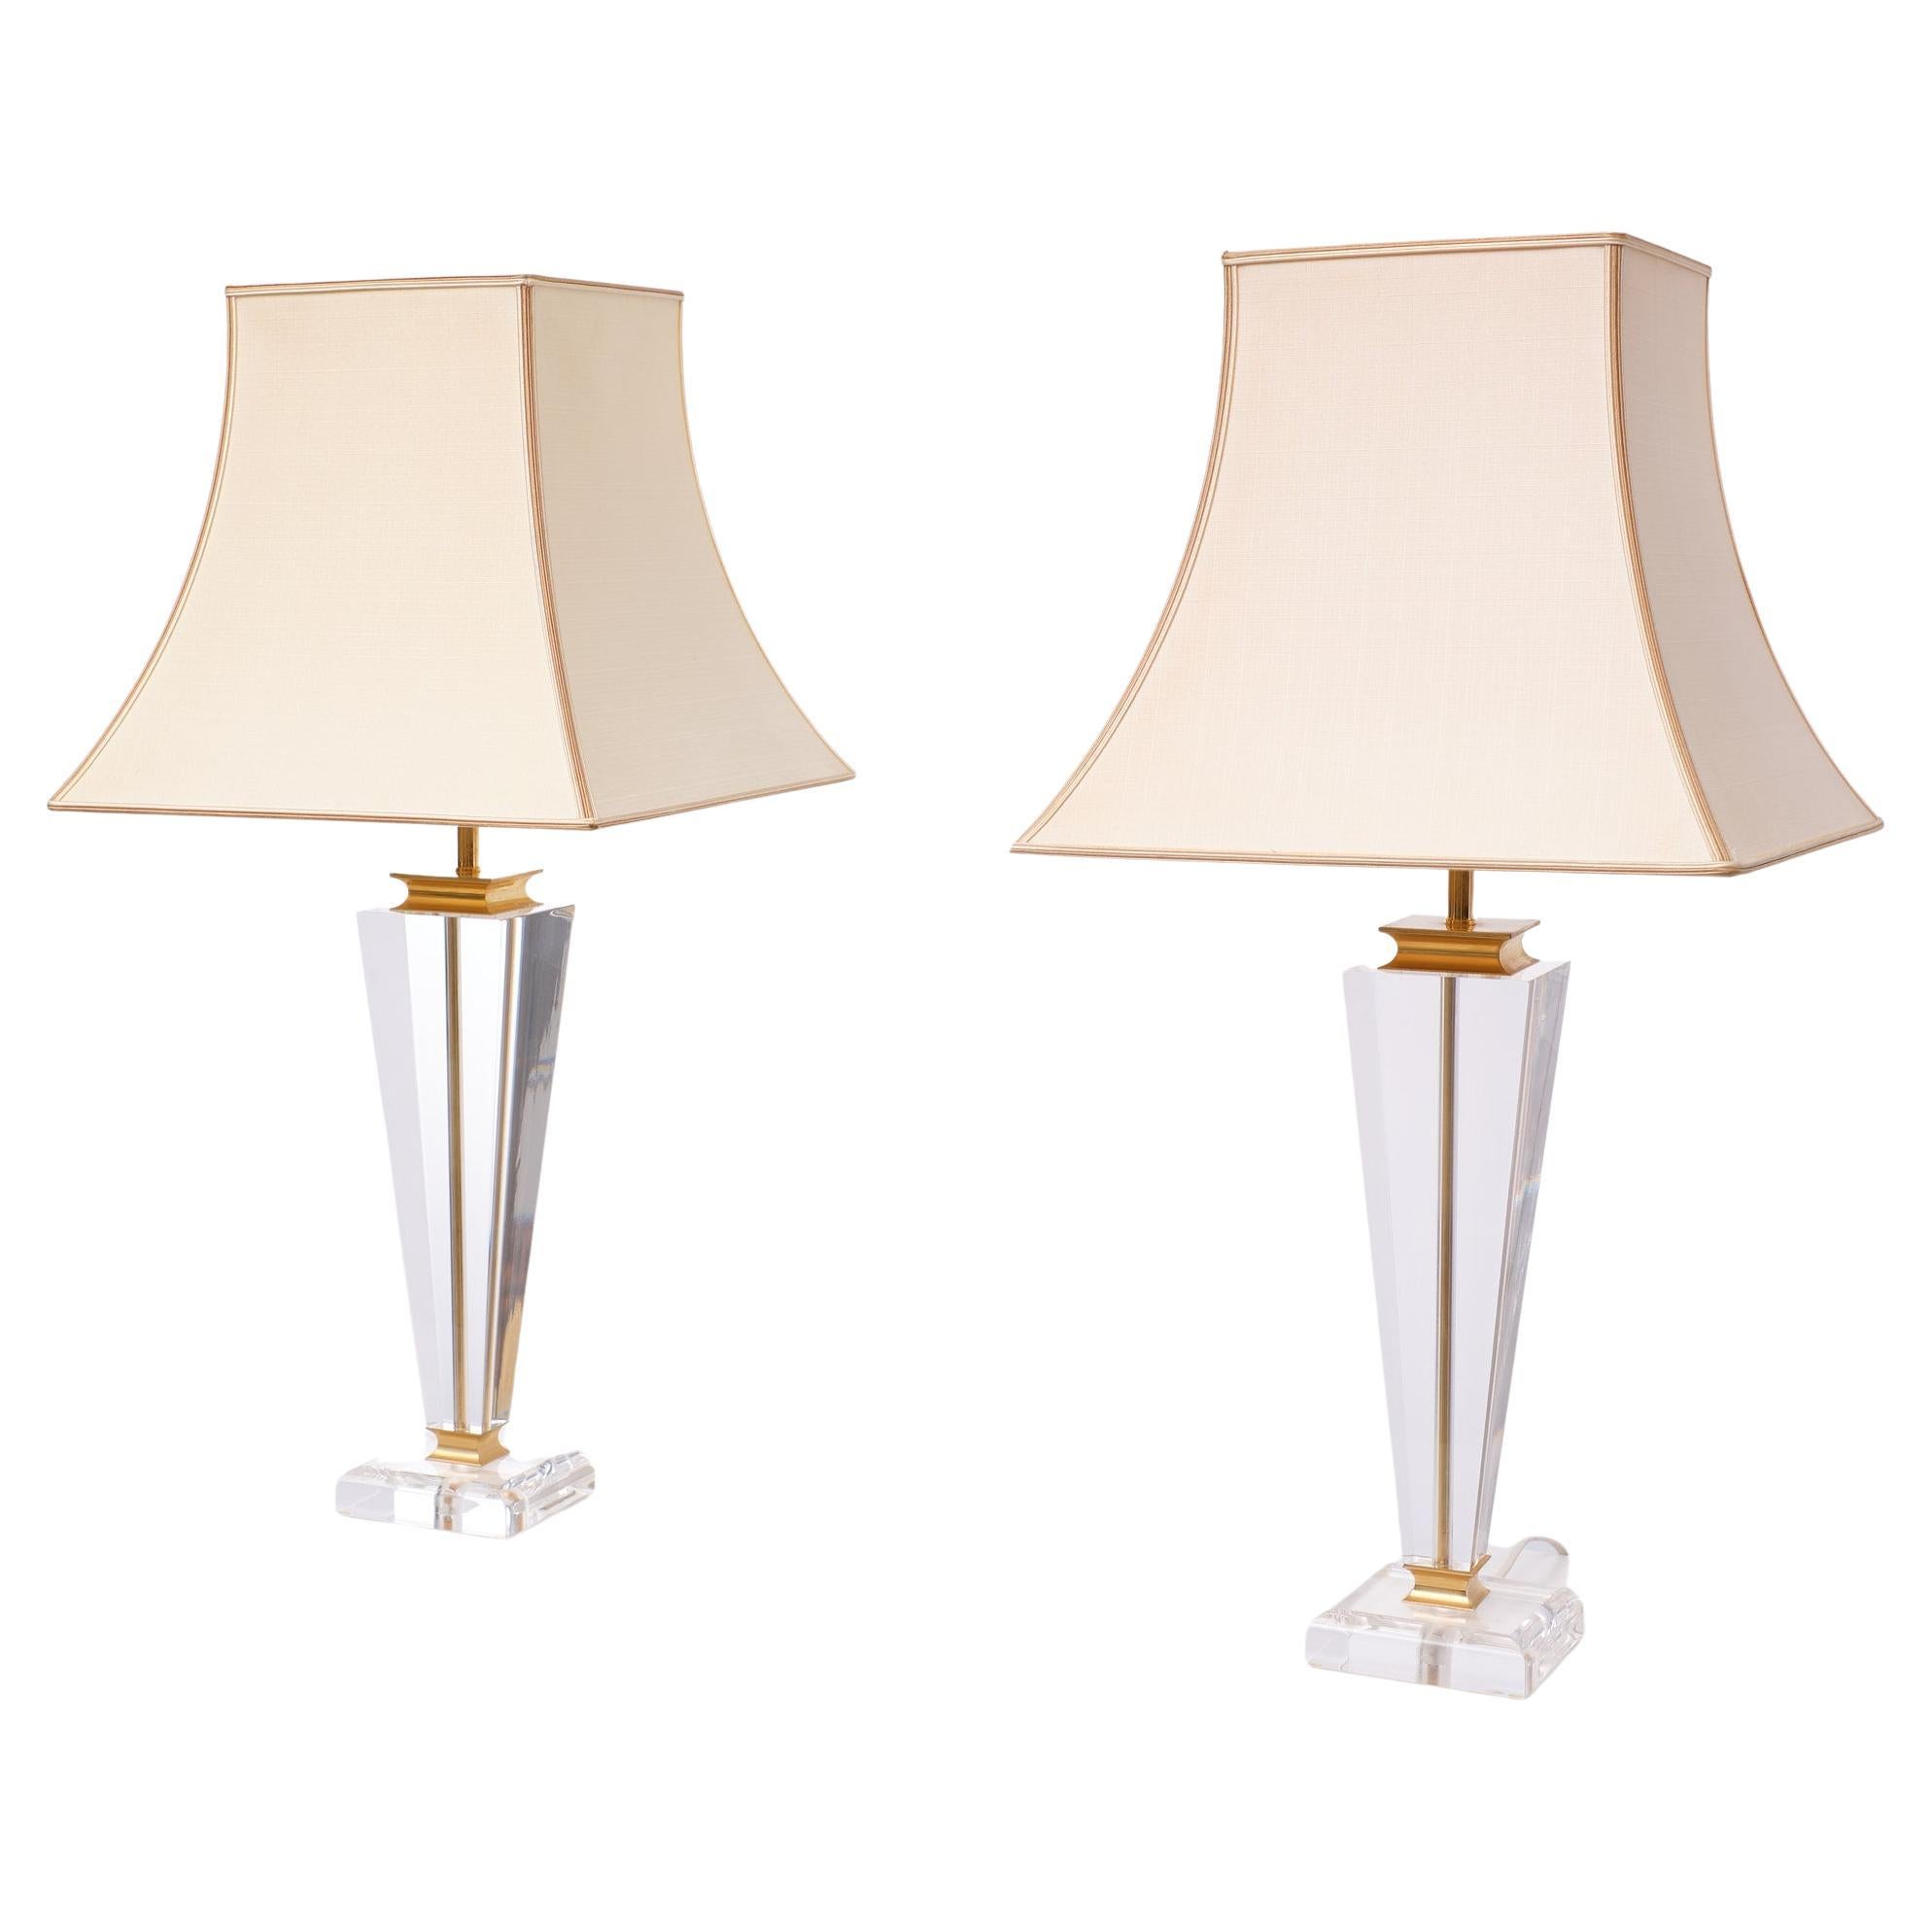 Hollywood Regency Parigi  Lucite table lamps  1970s Italy  In Good Condition For Sale In Den Haag, NL